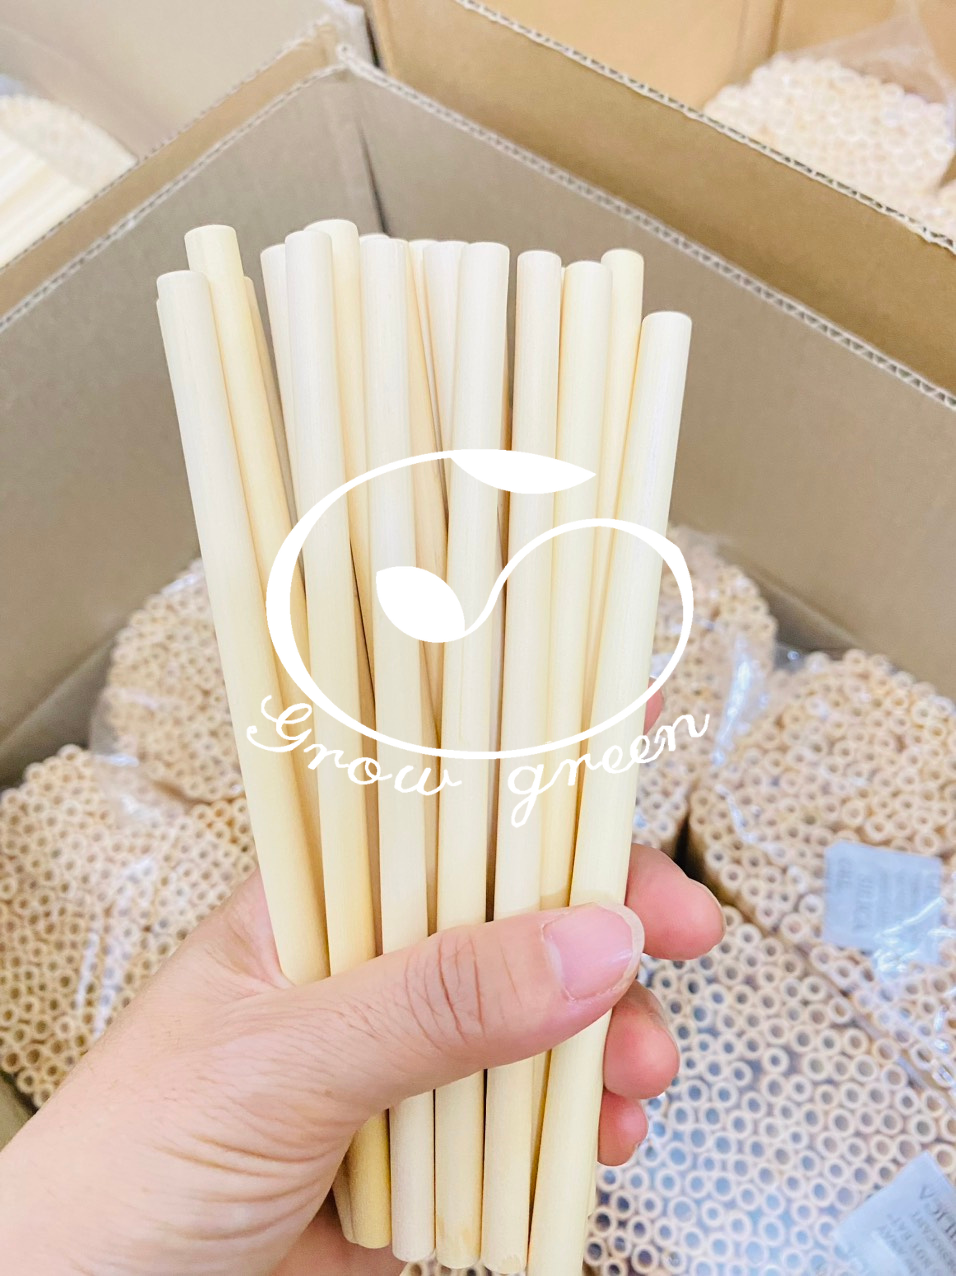 The advantages and disadvantages of bamboo straws